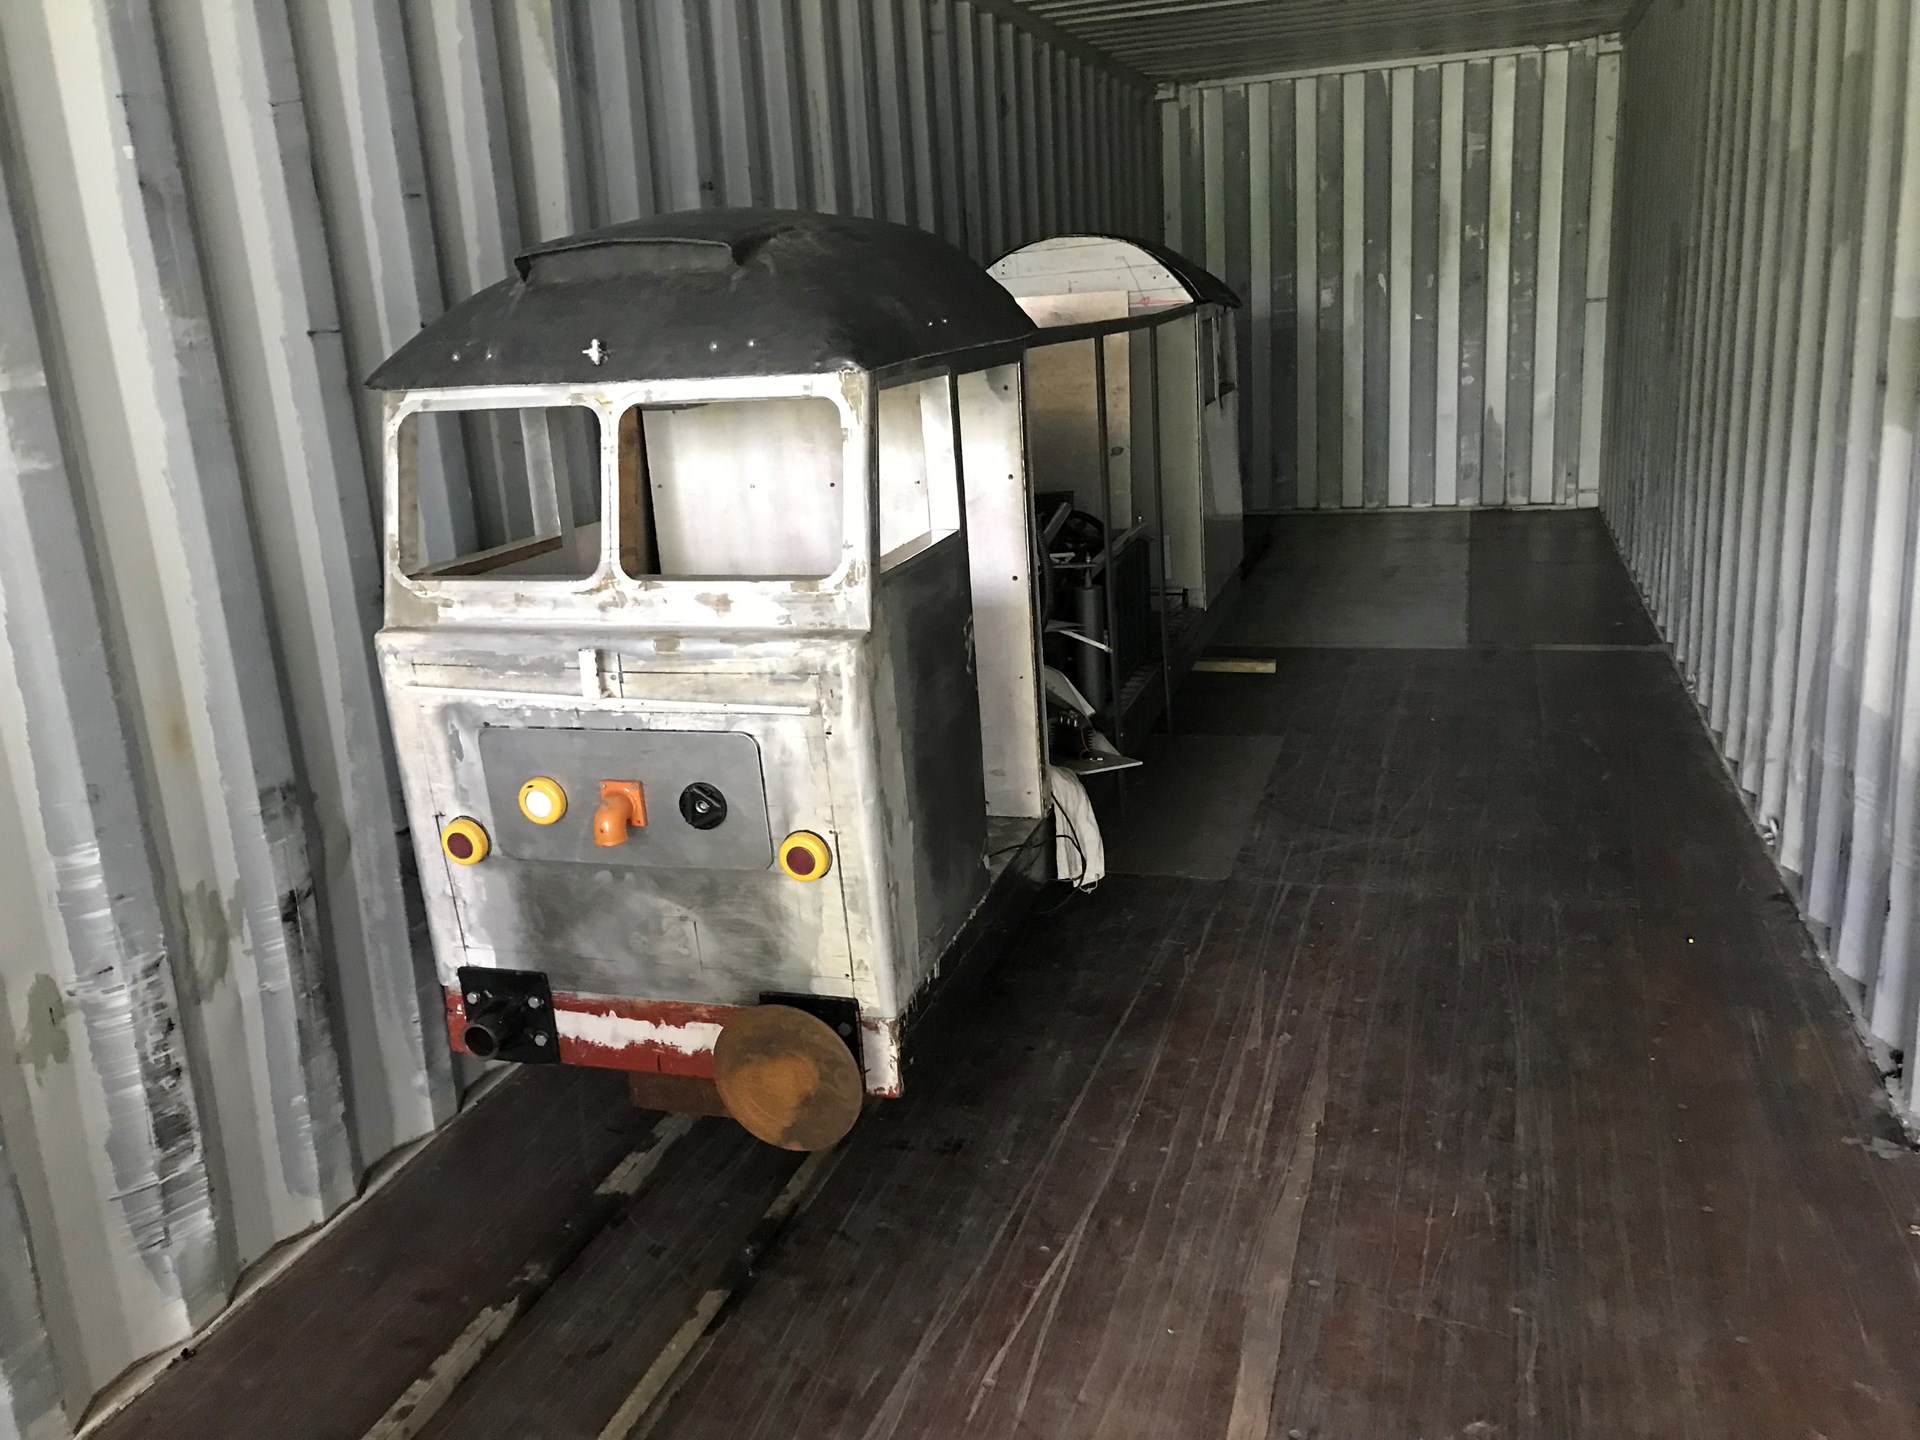 Donated part built Class 47 CoCo diesel electric loco. Not operational and needs a lot of work to complete it.